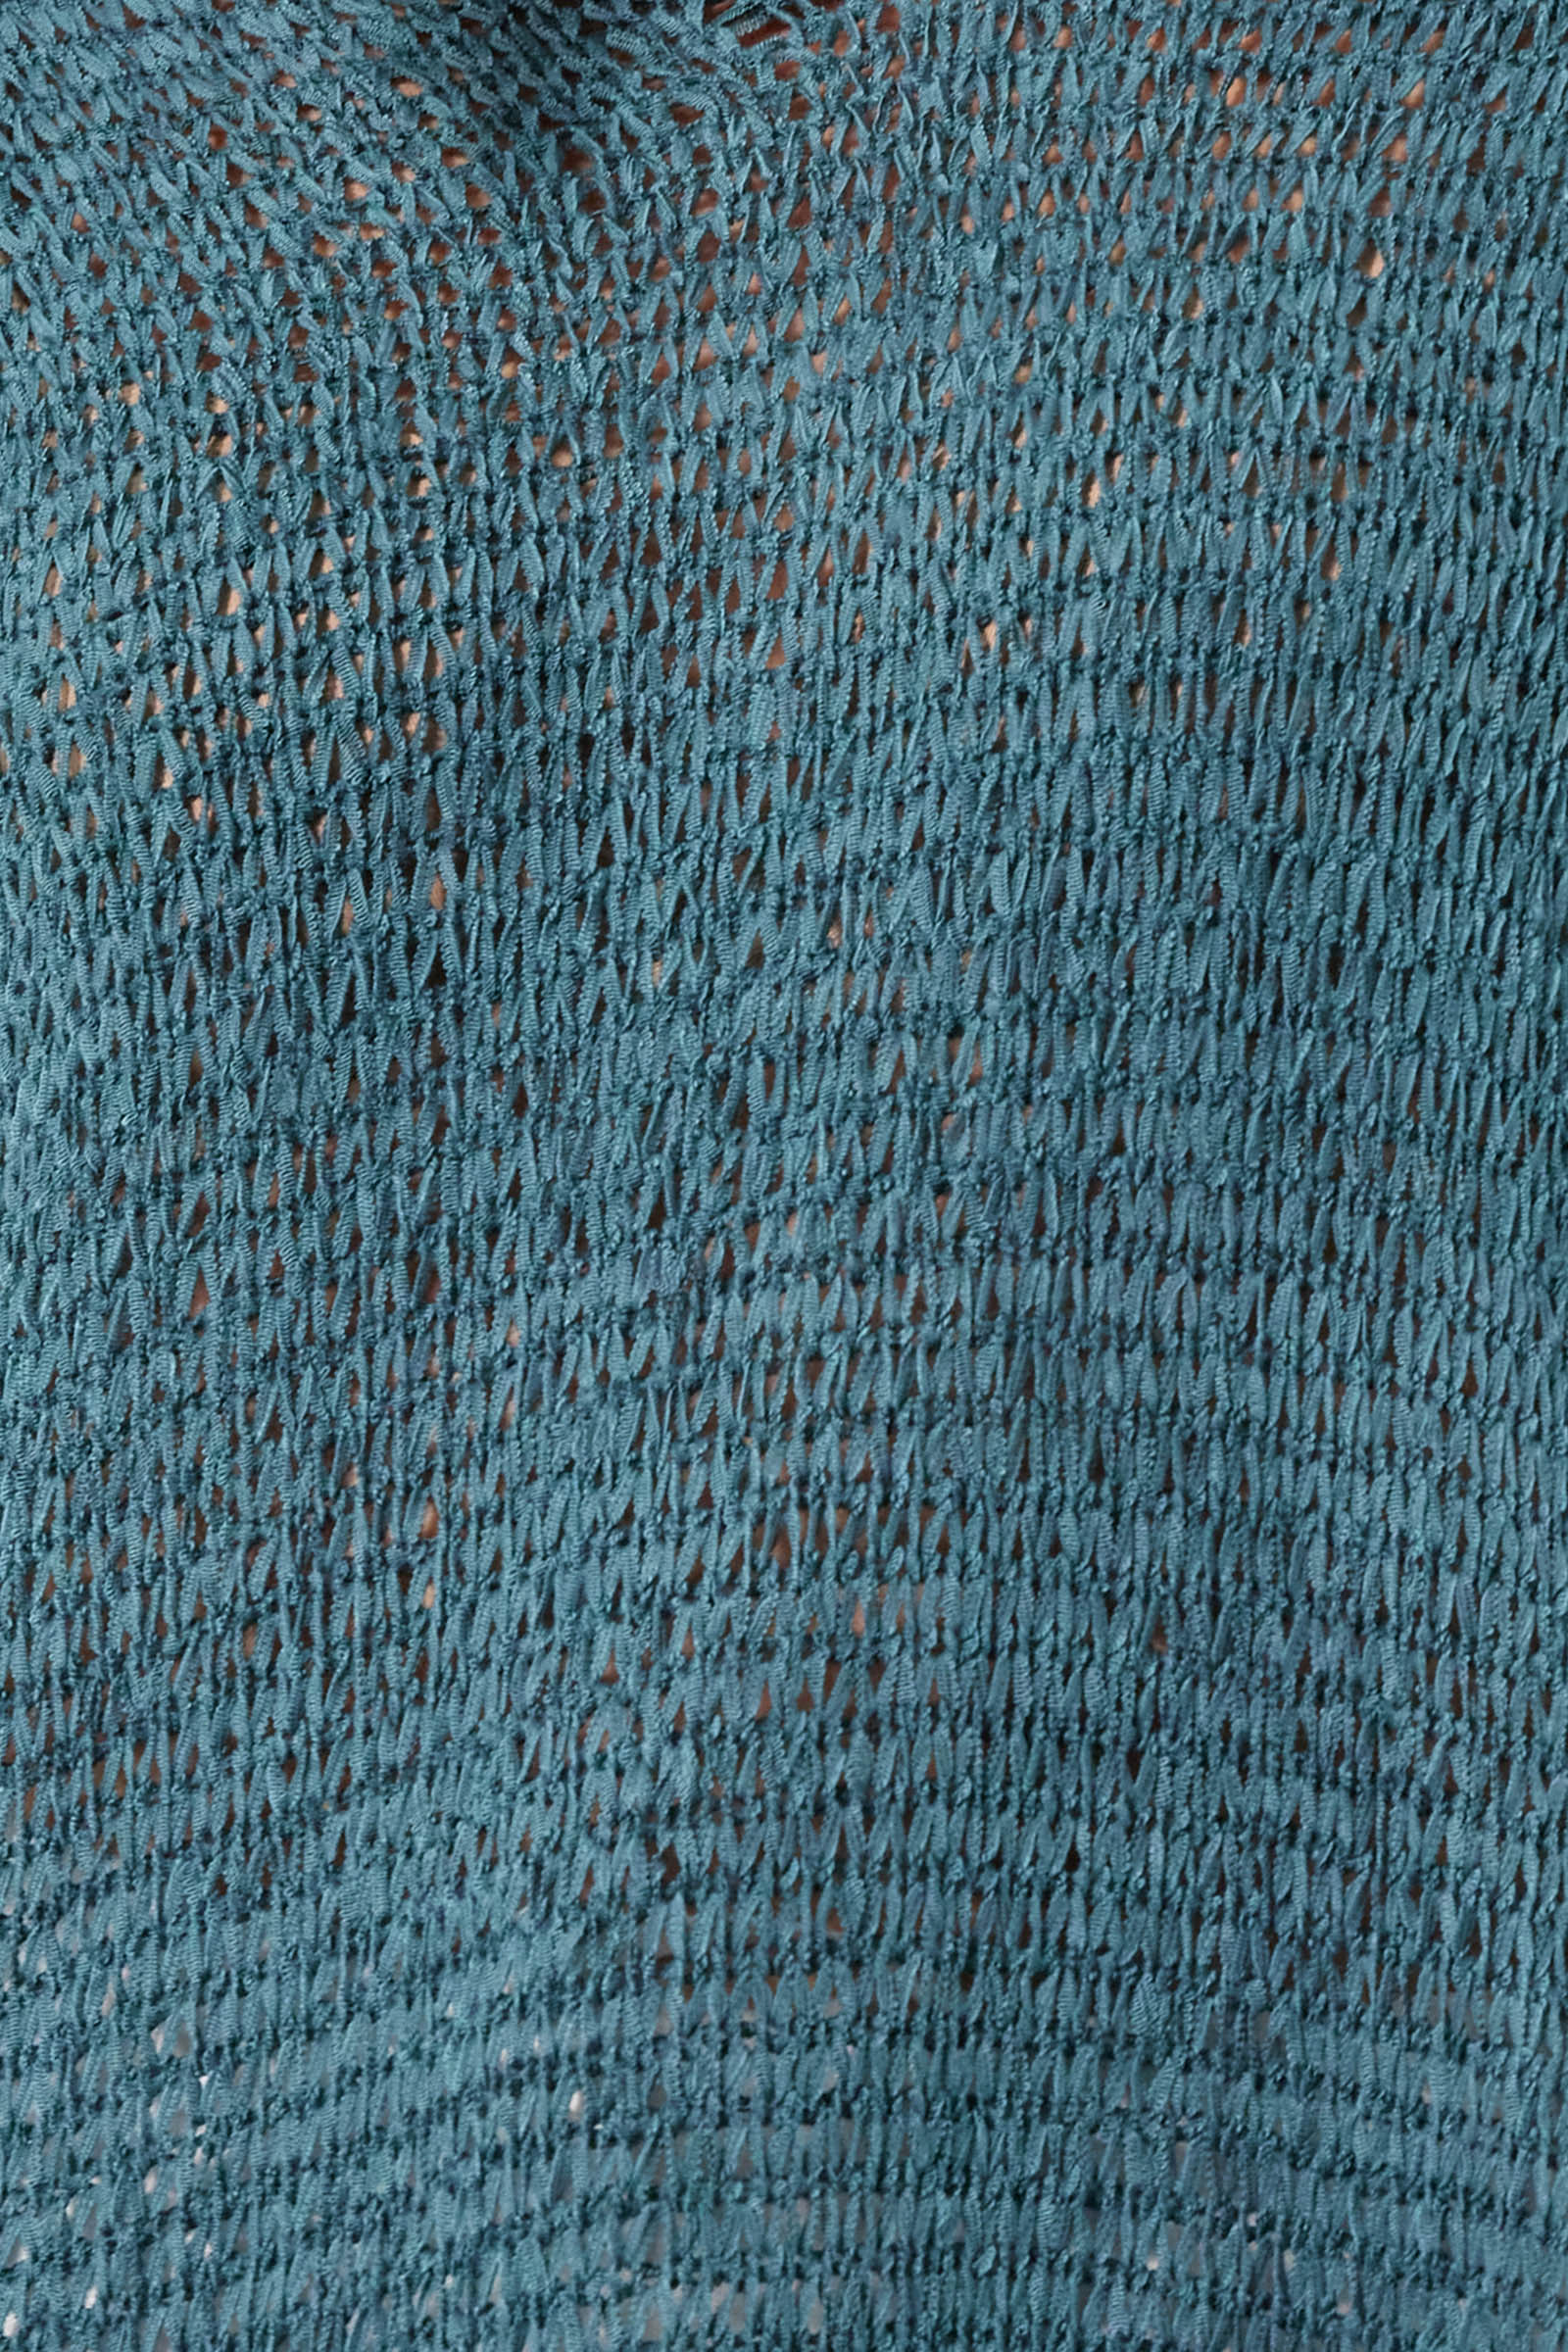 Marquee Jumper - Teal - Isle of Mine Clothing - Knit Jumper One Size